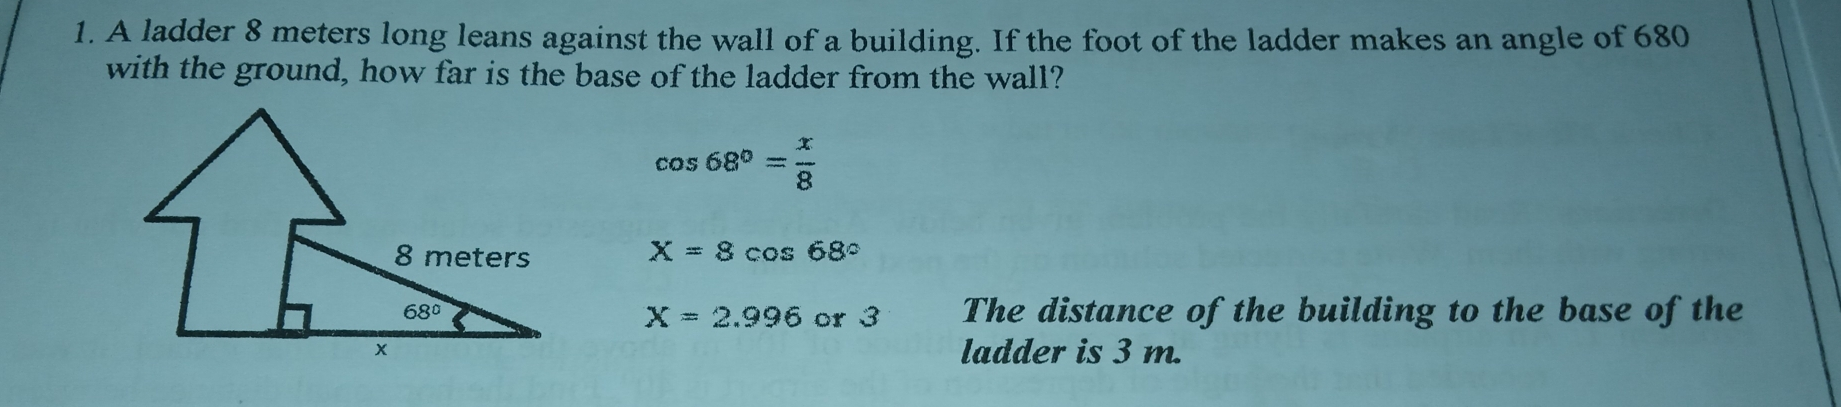 1. A ladder 8 meters long leans against the wall of a building. If the foot of the ladder makes an angle of 680 with the ground, how far is the base of the ladder from the wall? cos 68 ° = x/8 X=8 cos 68 ° The distance of the building to the base of the X=2.996 or 3 ladder is 3 m.